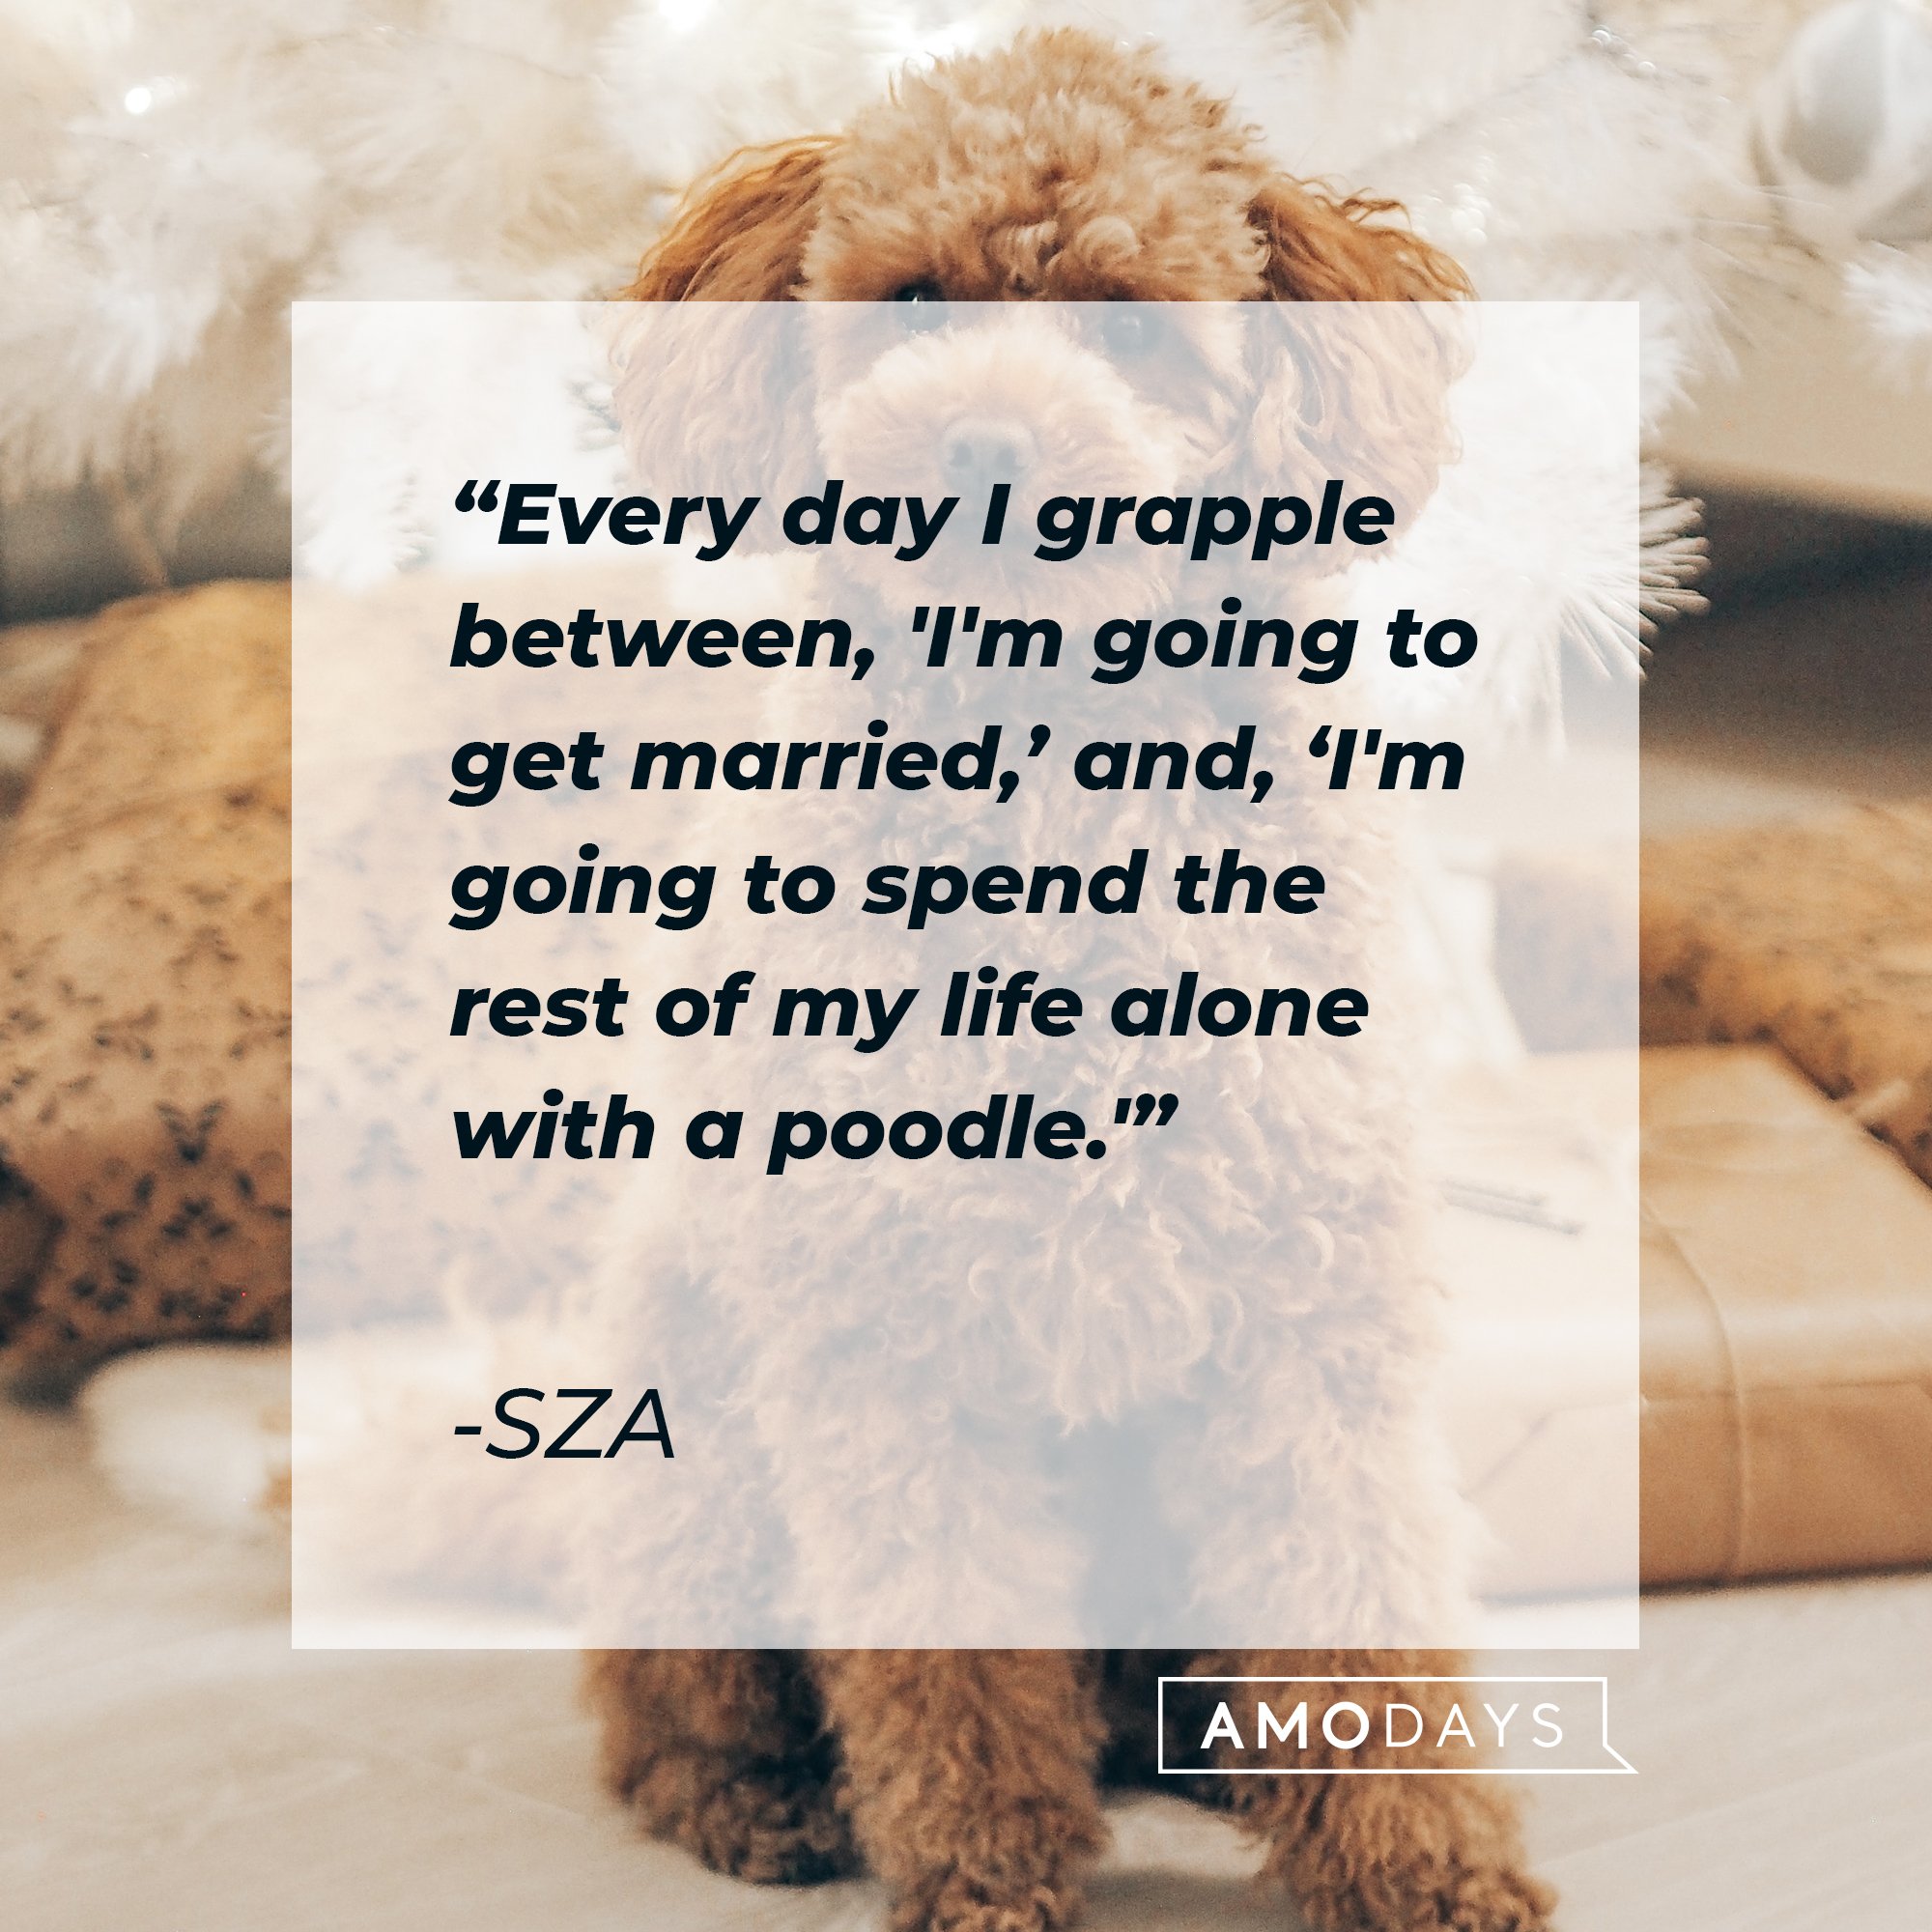 SZA’s quote: "Every day I grapple between, 'I'm going to get married,' and, 'I'm going to spend the rest of my life alone with a poodle.'" | Image: AmoDays